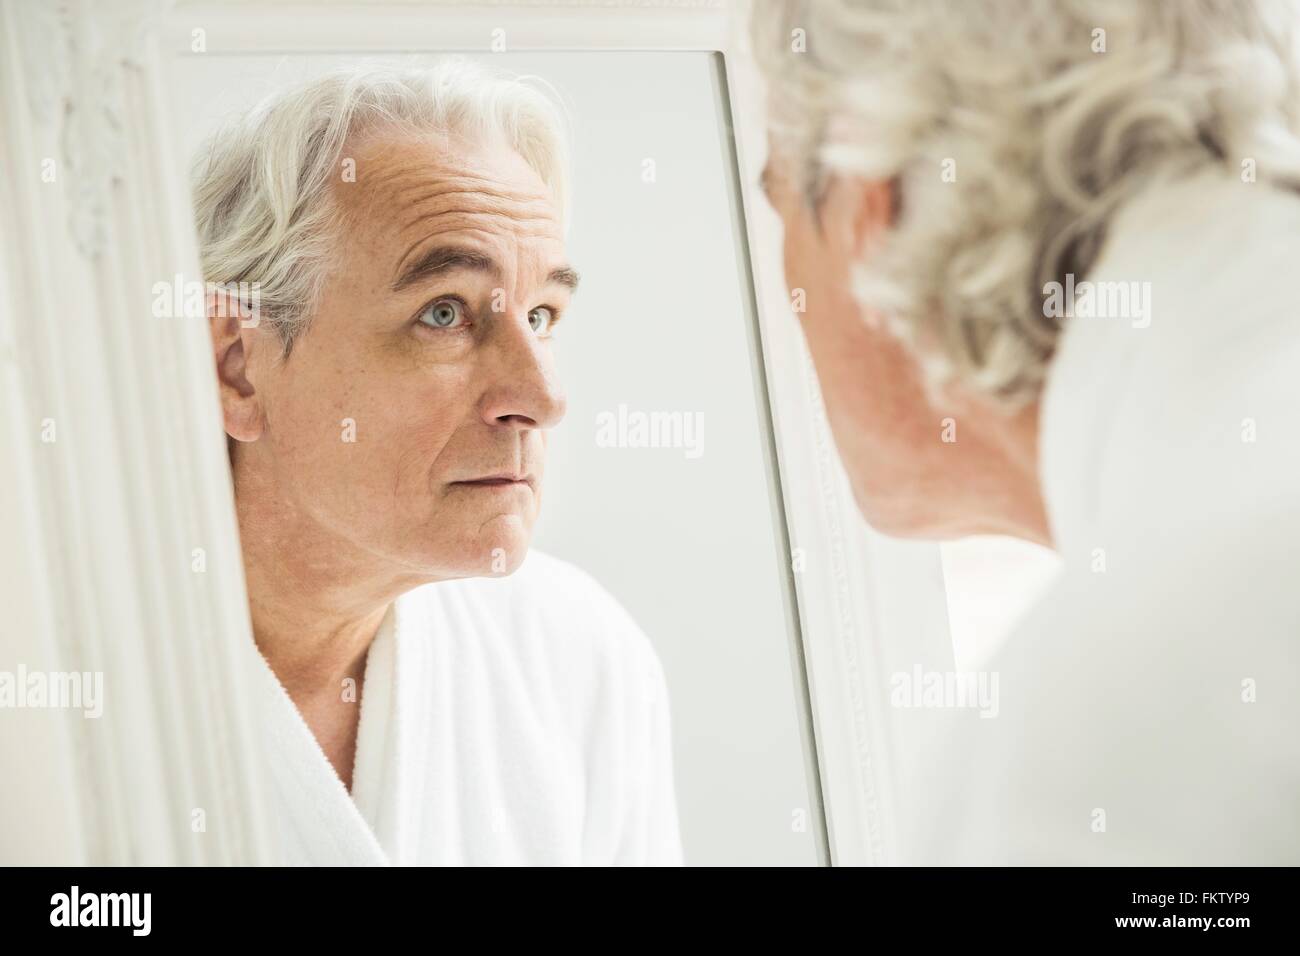 Grey haired senior man staring at himself in mirror Stock Photo